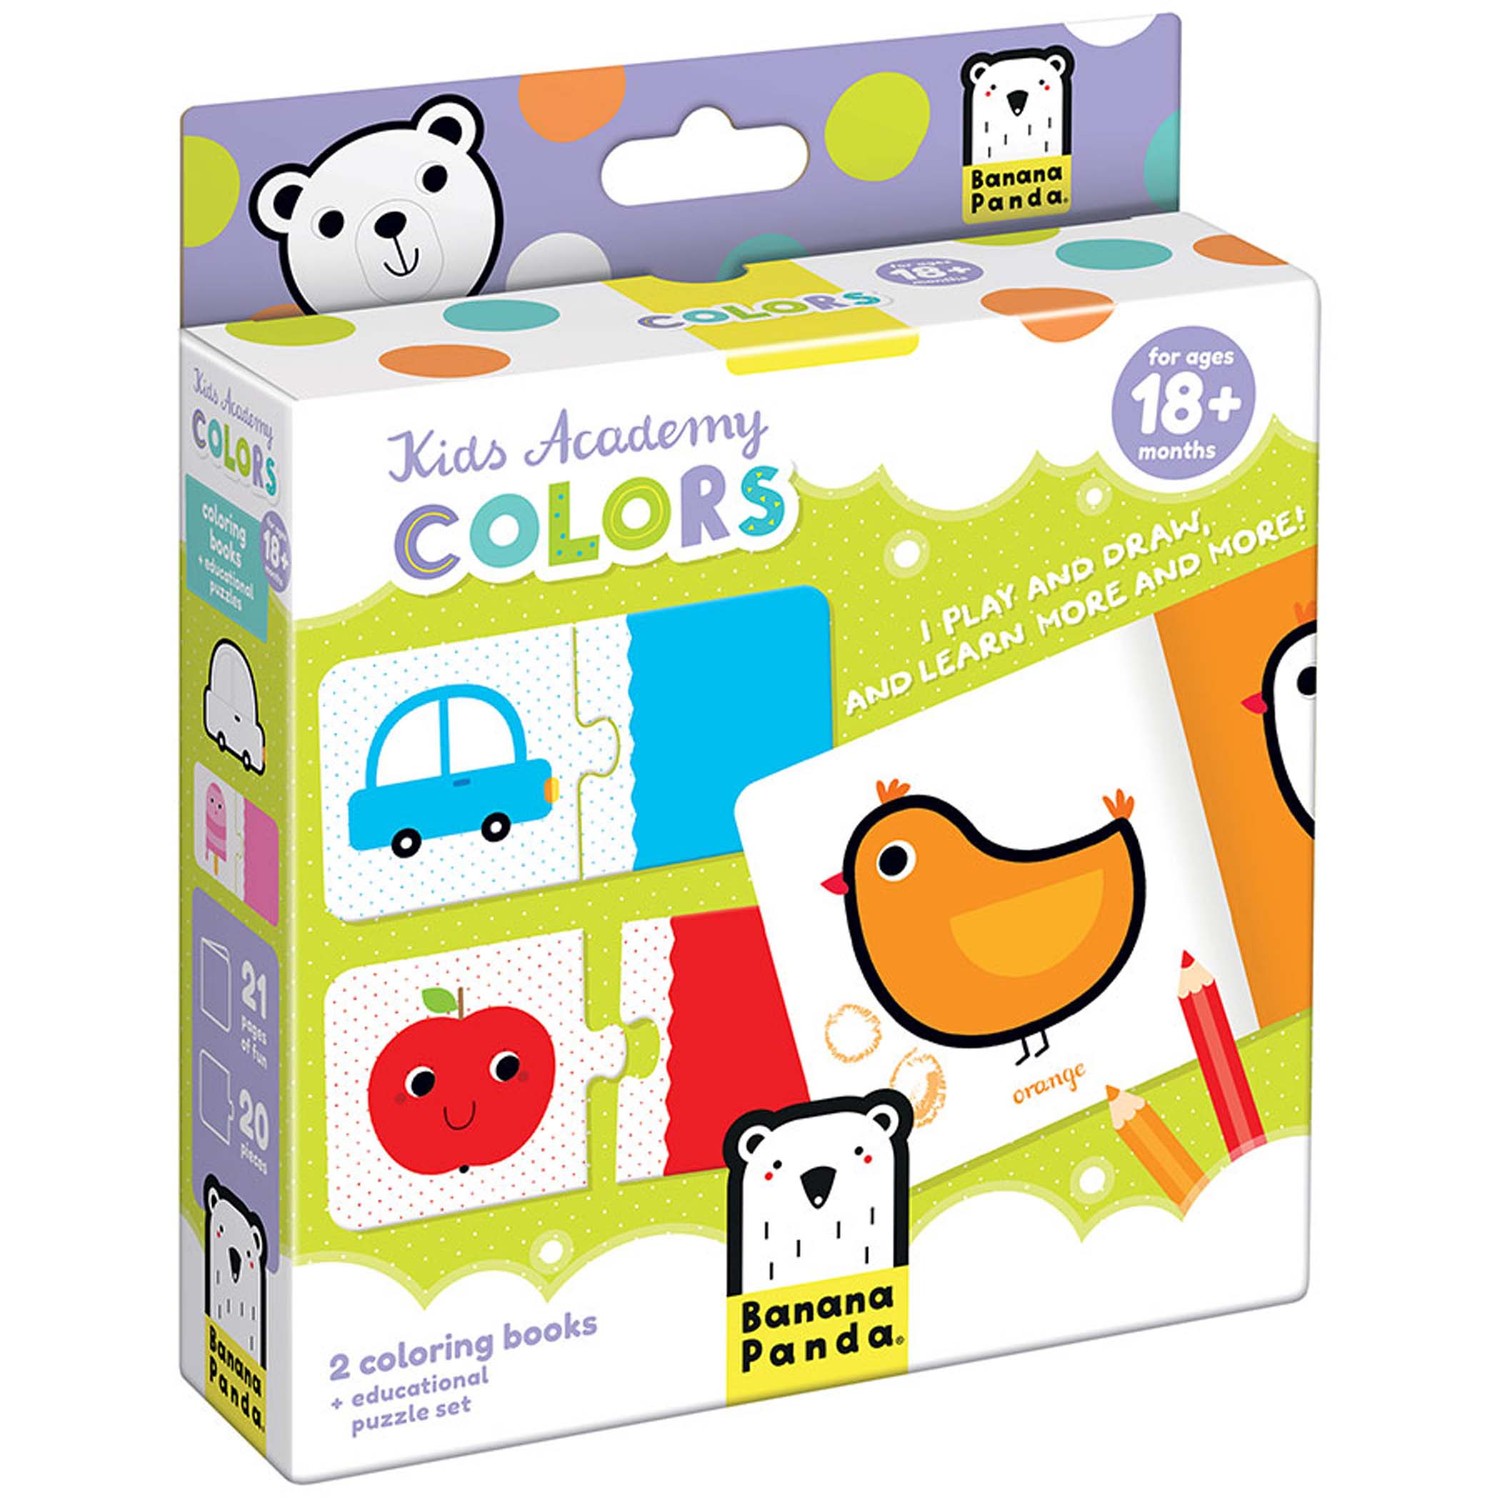 Kid Academy Colors, Coloring Book & Puzzles